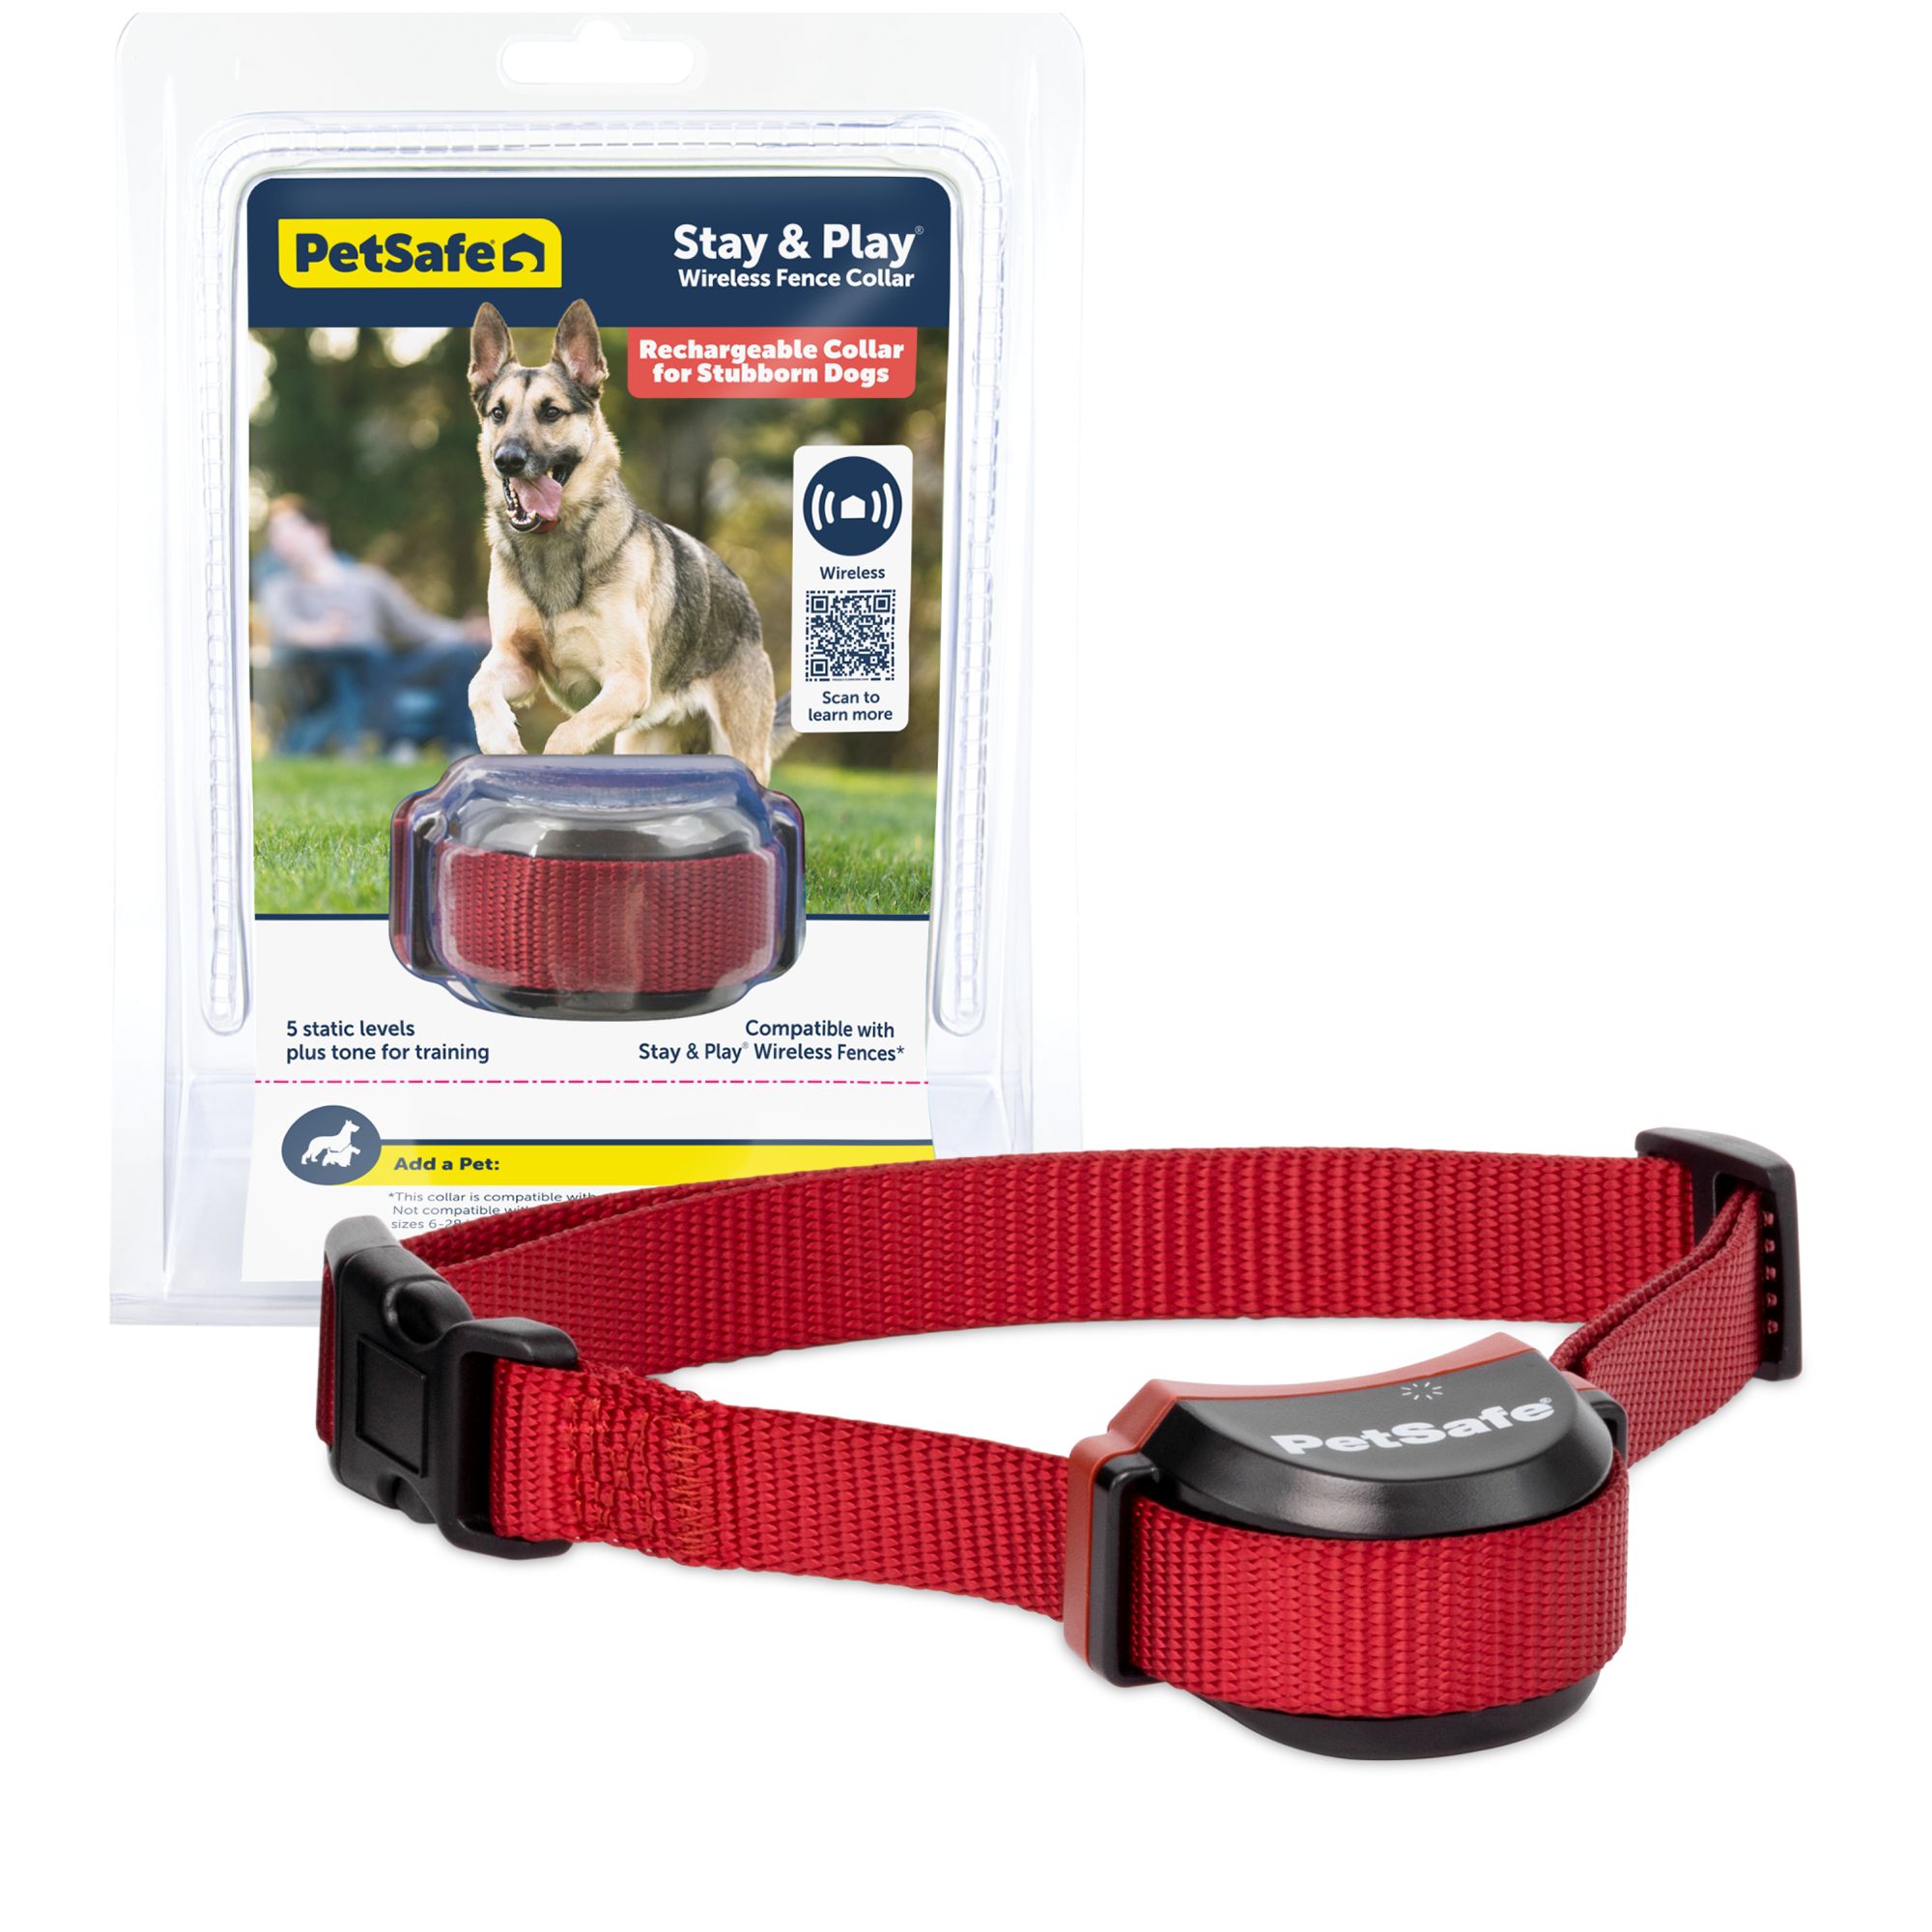 Luxipaws®️ Wireless Dog Fence & Training Collar - Dog Containment